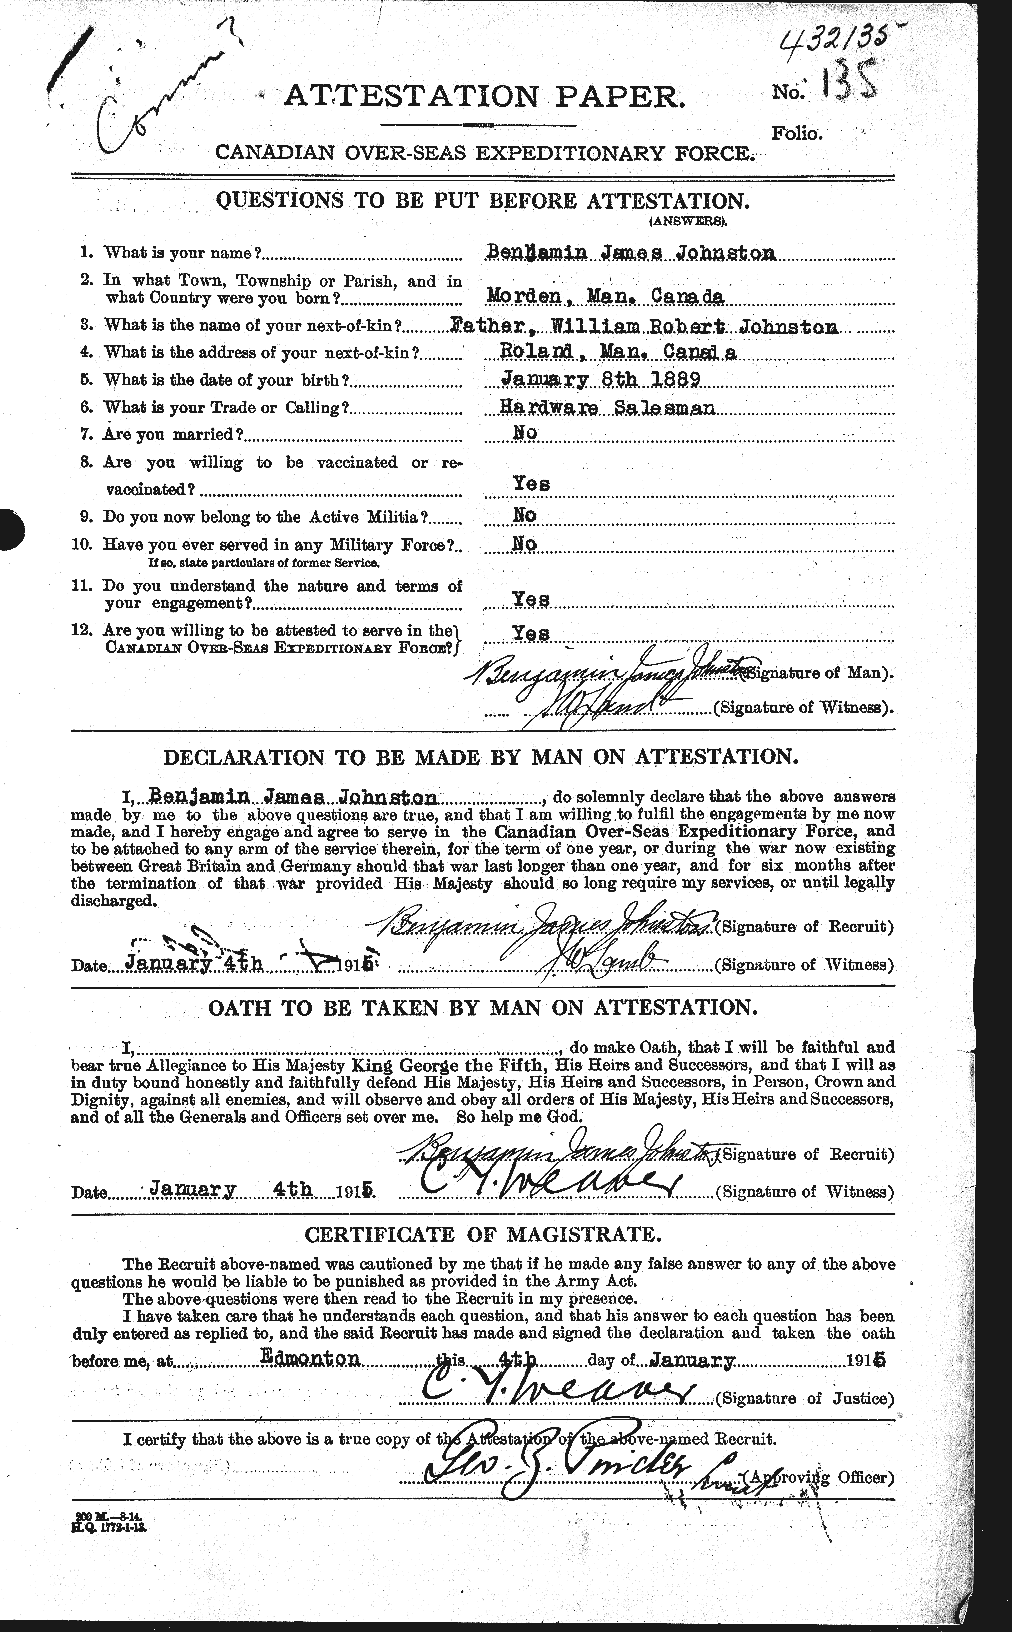 Personnel Records of the First World War - CEF 421067a